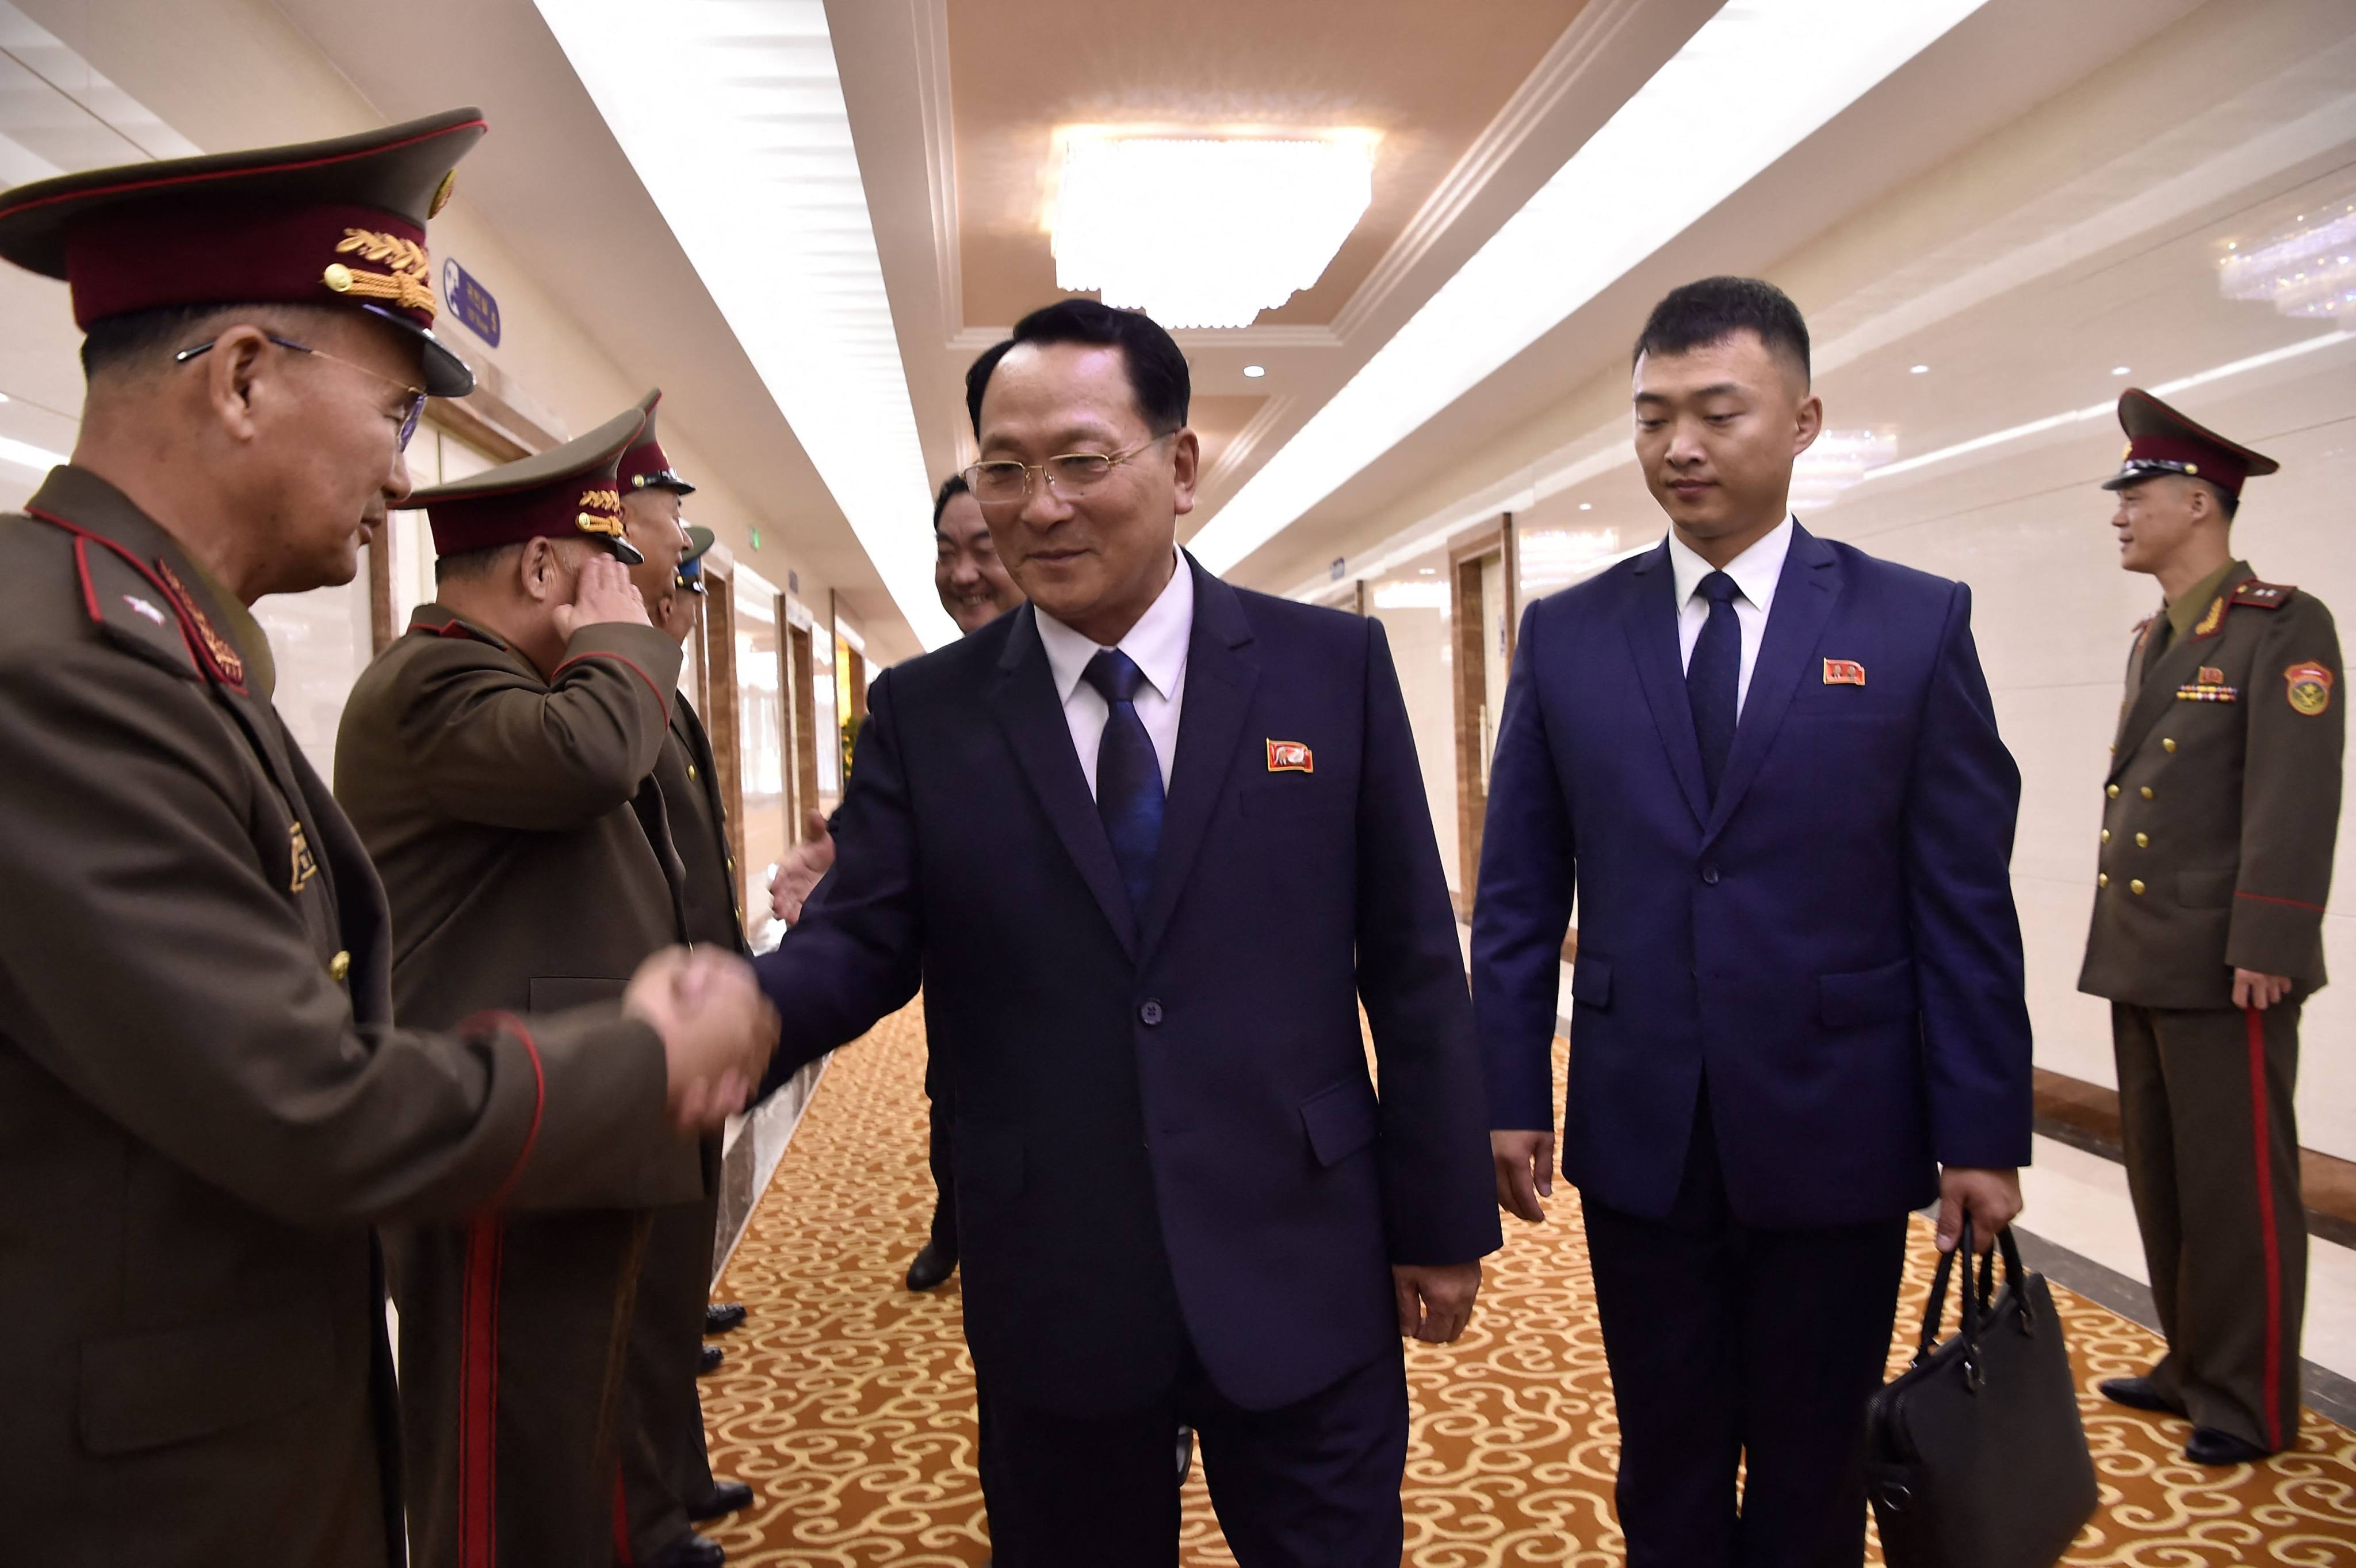 Kim Geum-chol, president of Kim Il-sung Military University, shakes hands with North Korean military officials before departing to Russia from Pyongyang on July 8. Photo: AFP